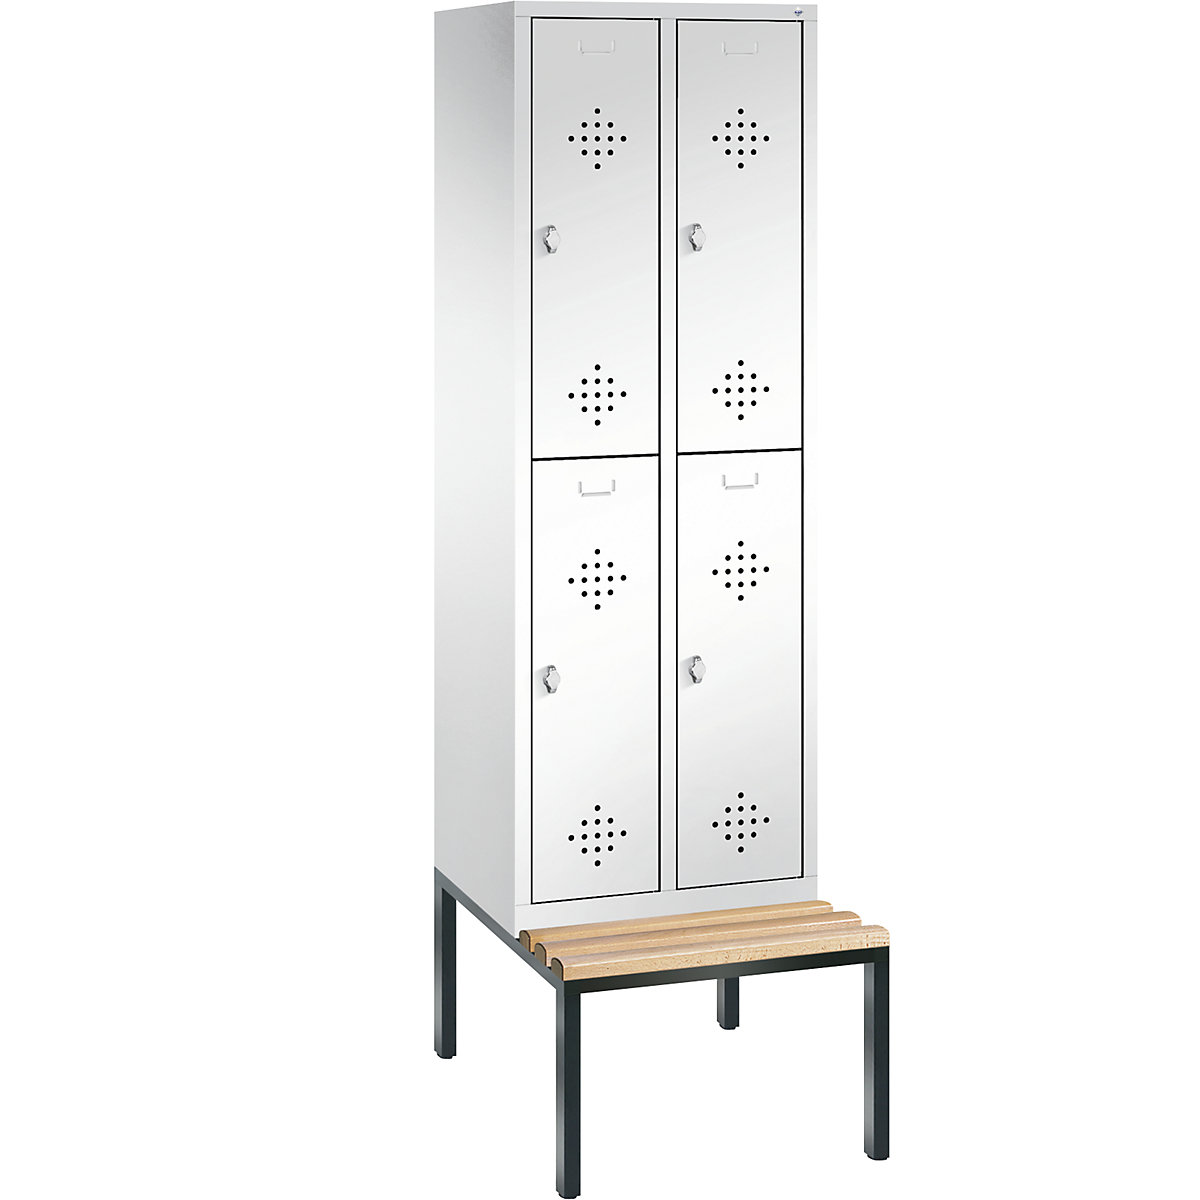 CLASSIC cloakroom locker with bench mounted underneath, double tier - C+P